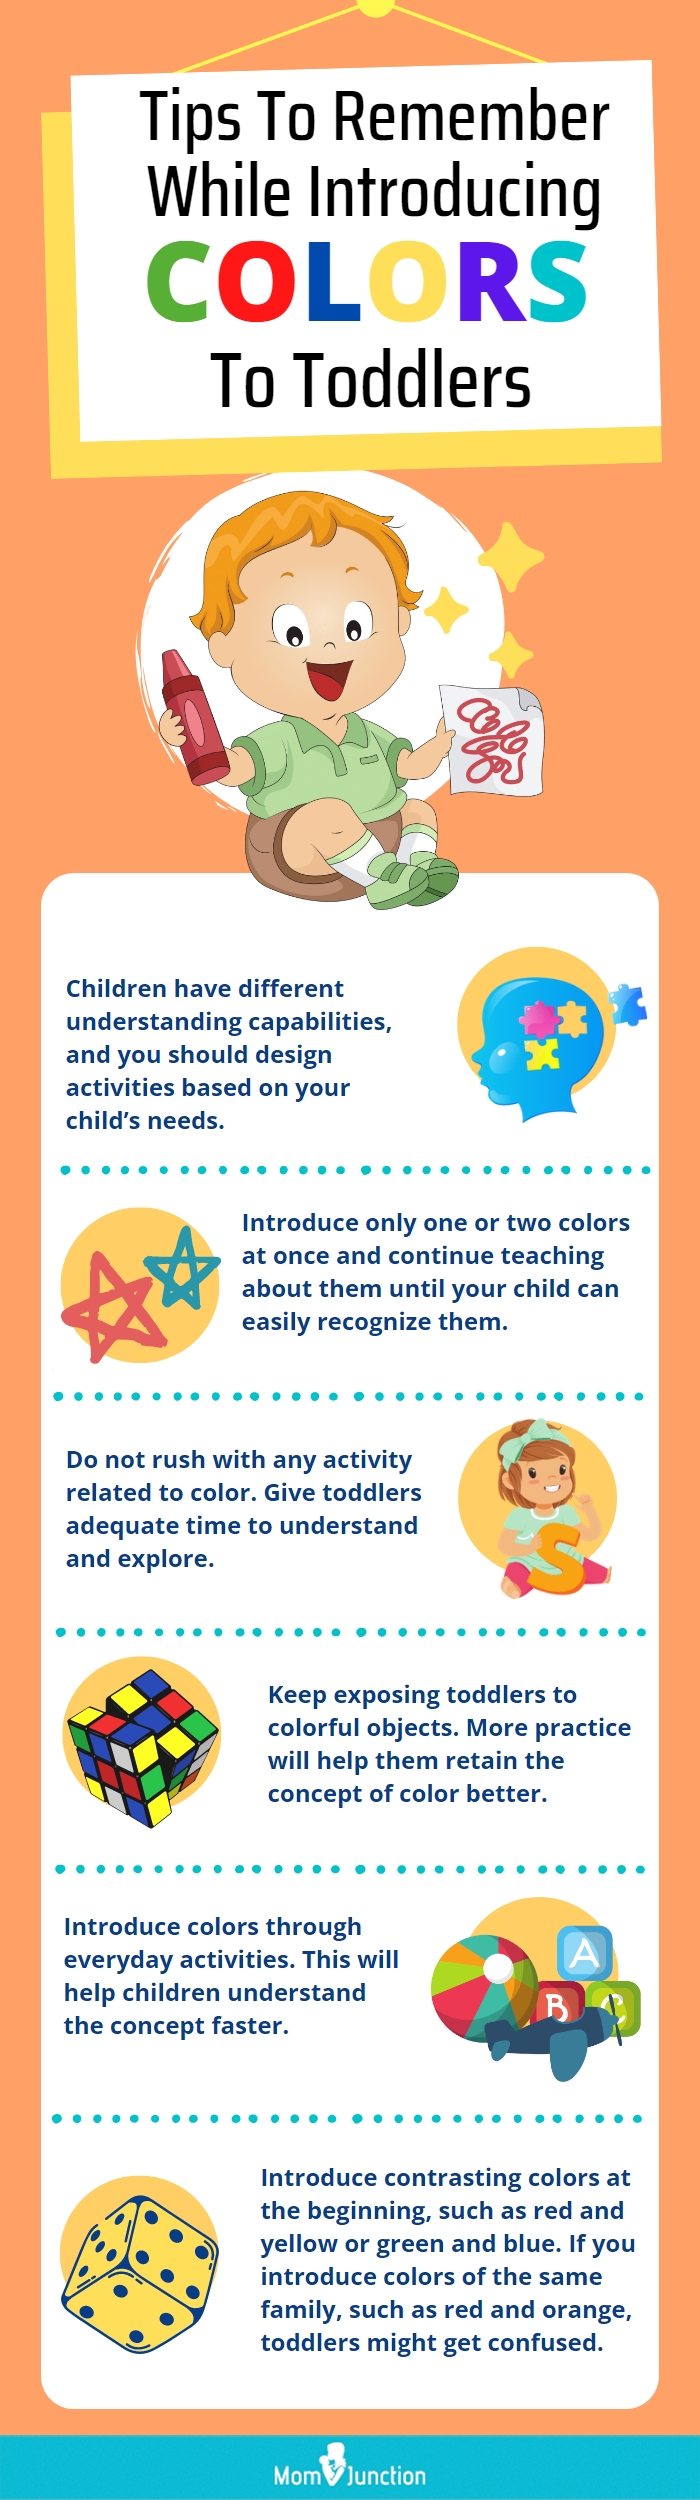 tips to remember while introducing colors to toddlers (infographic)